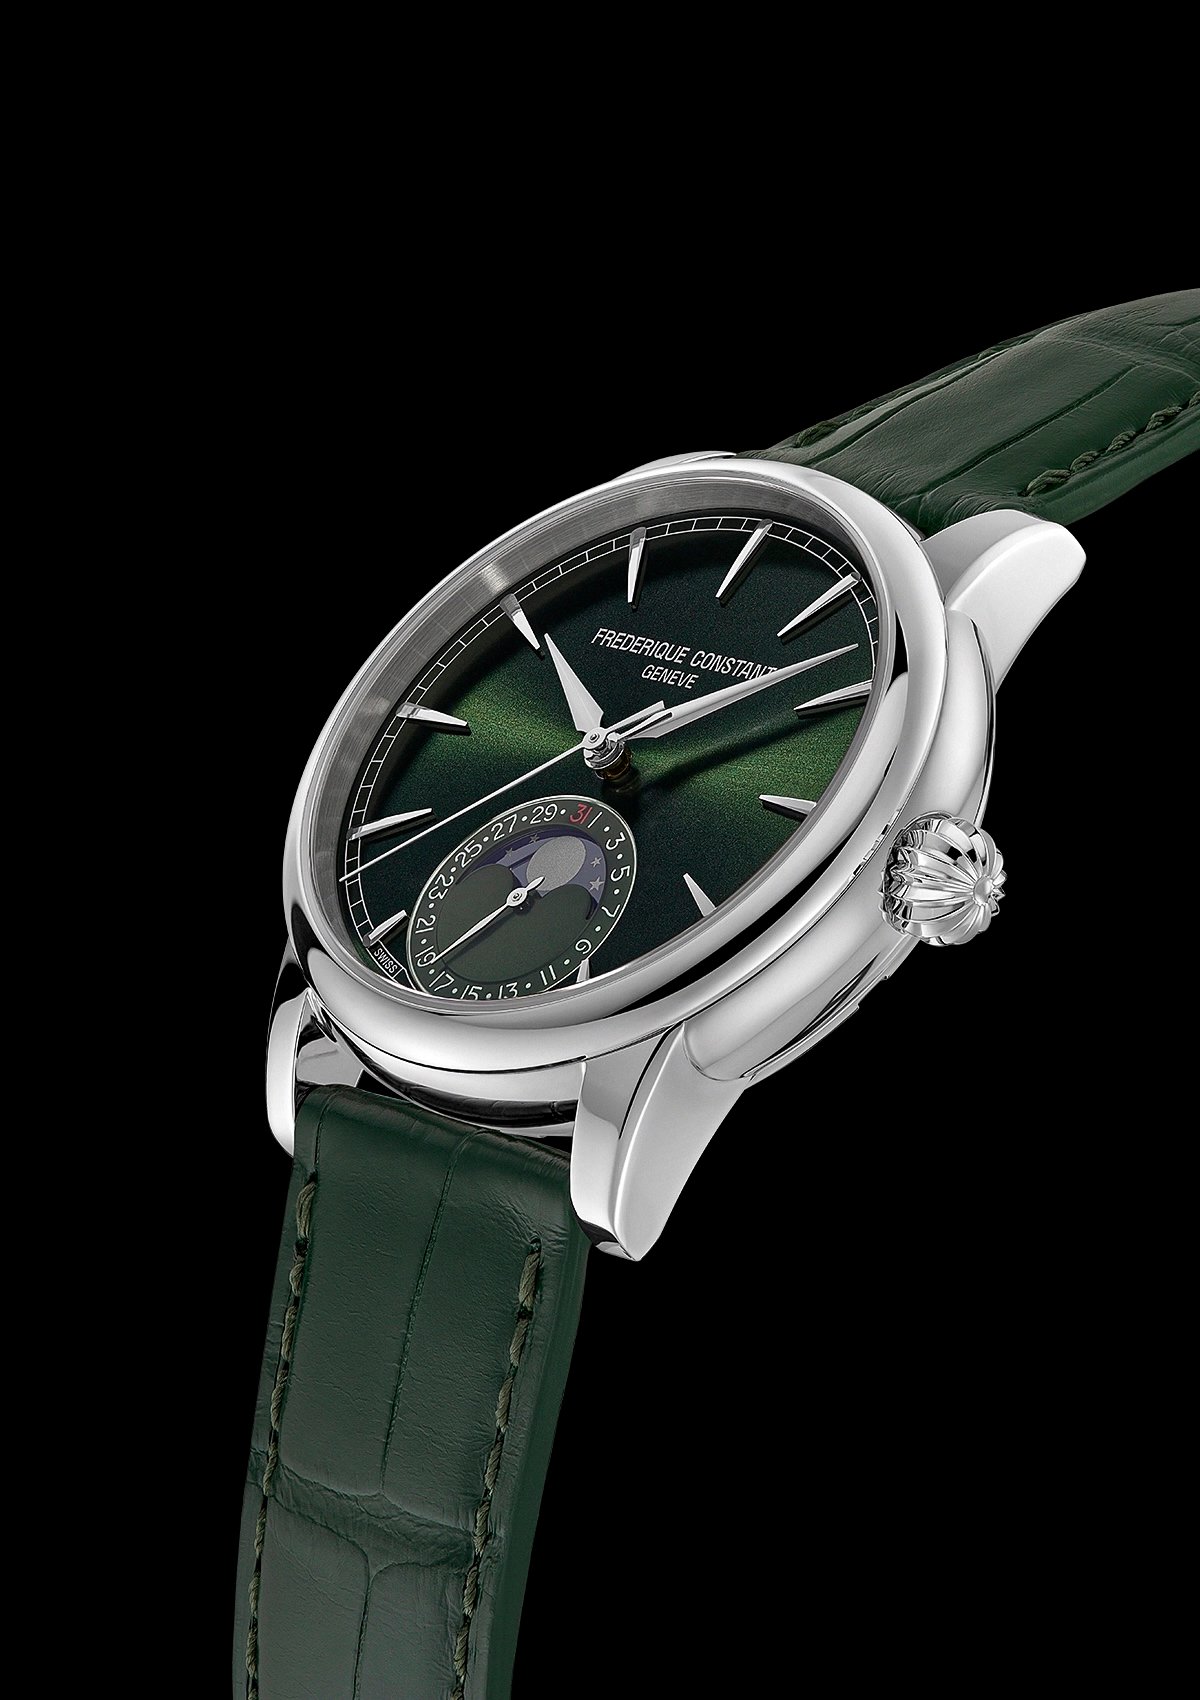 Introducing: The Updated Frederique Constant Classic (Moonphase) Date Manufacture